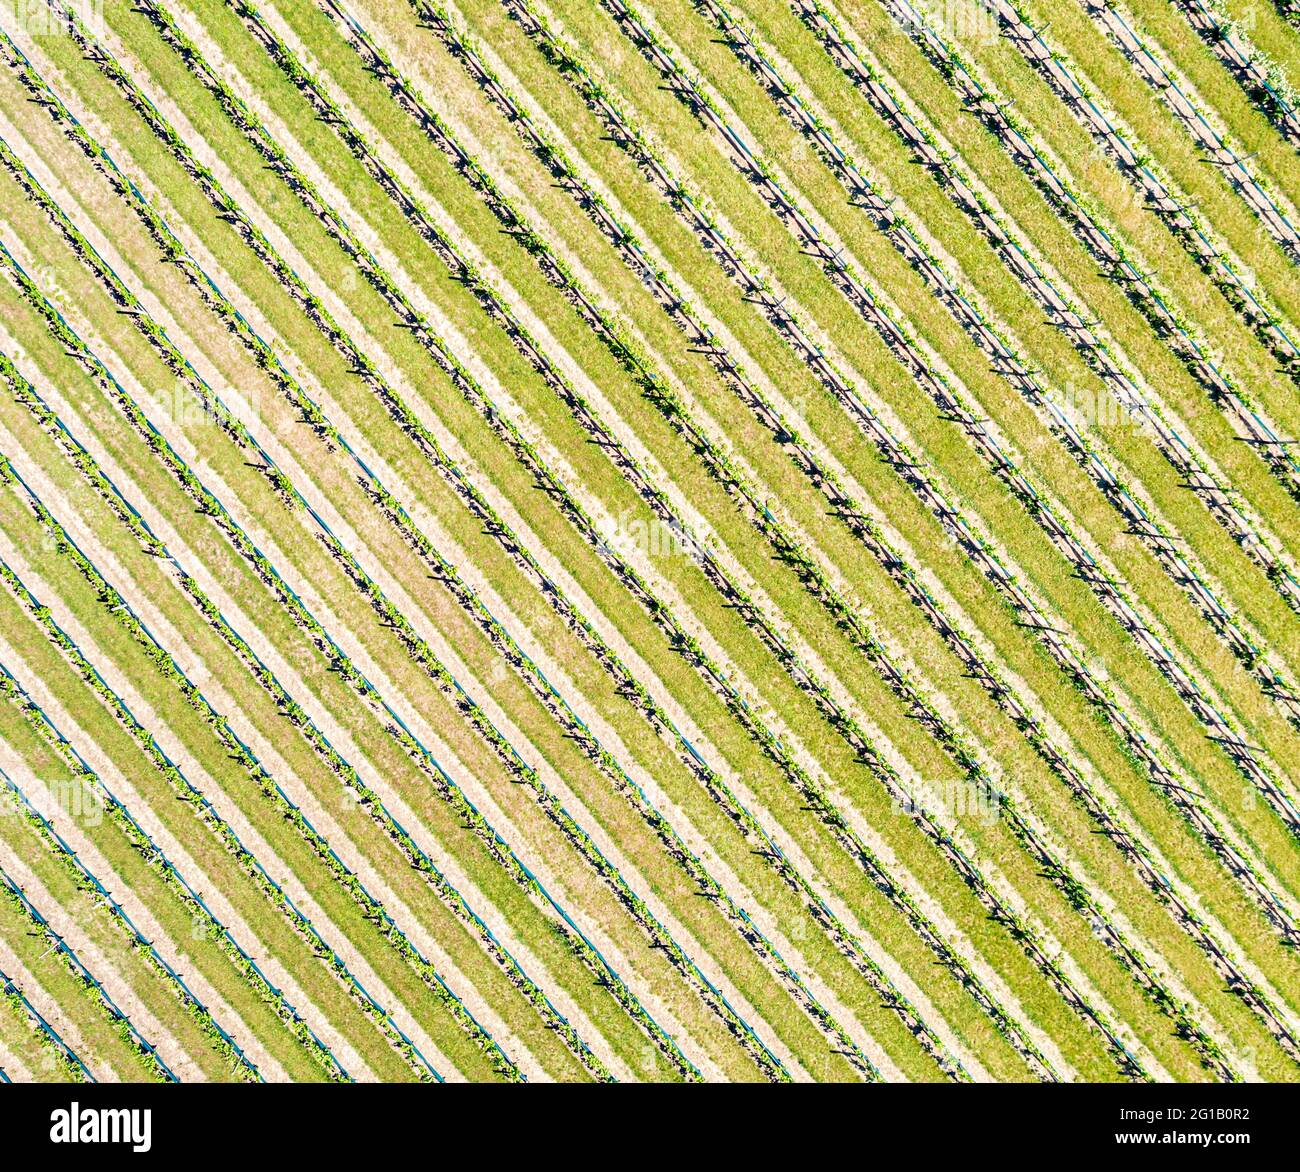 Aerial view of vineyards in Eastern Long Island, NY Stock Photo